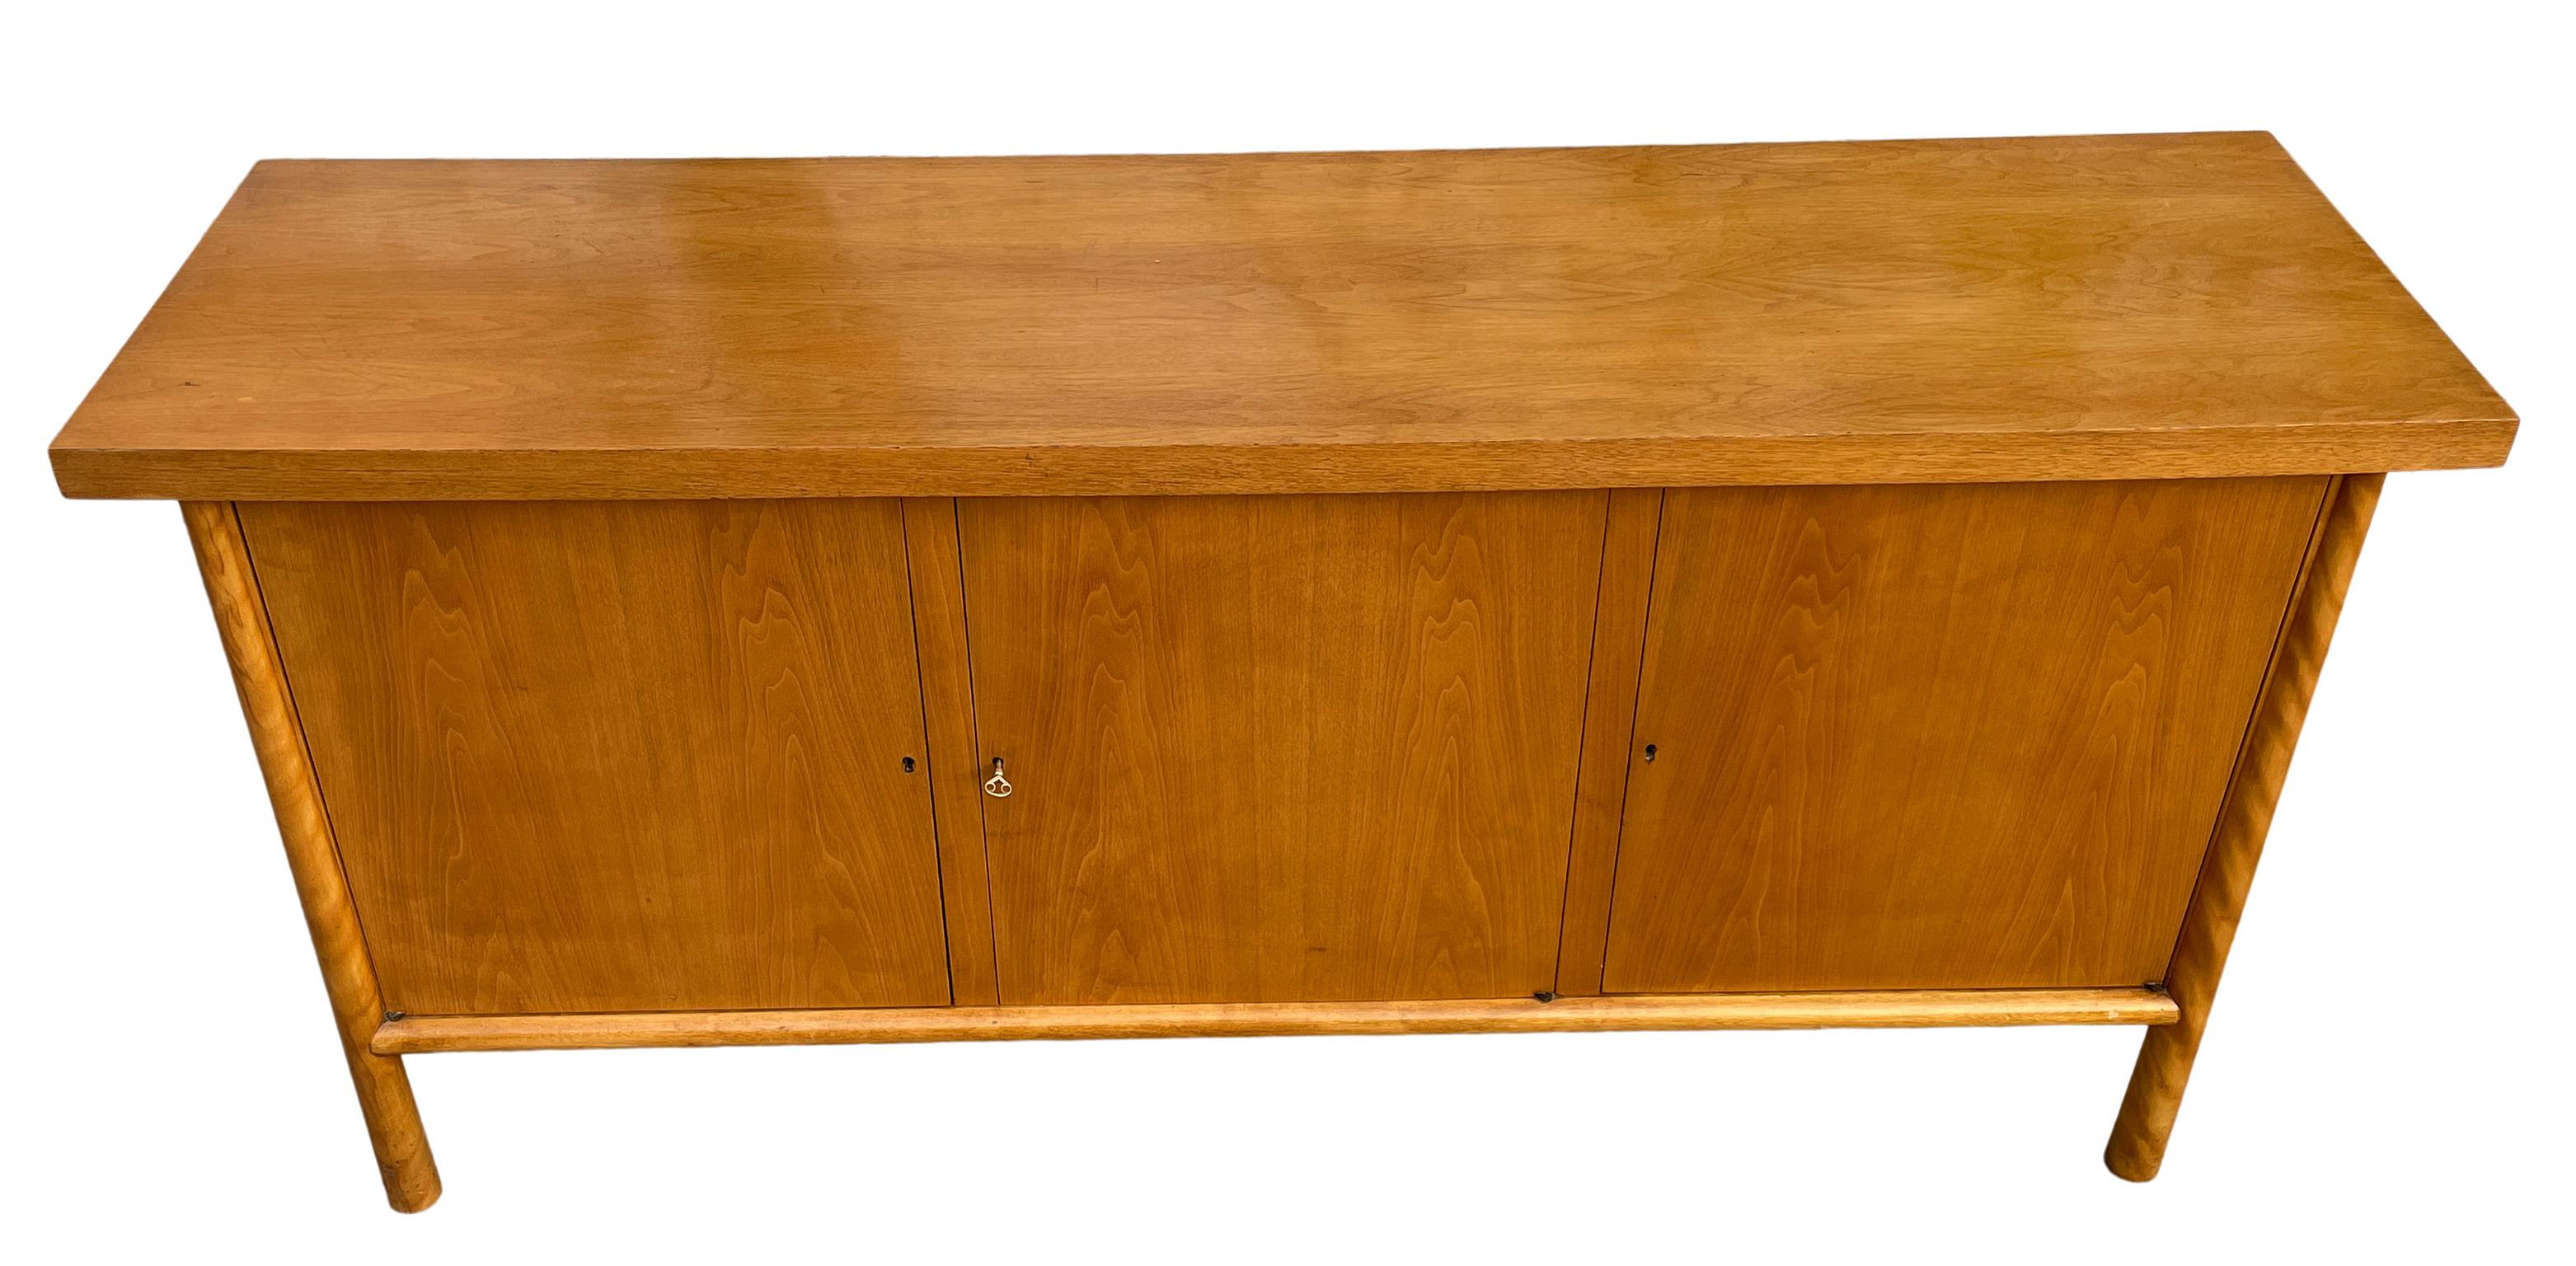 Beautiful blonde maple three door 'MING' credenza sideboard with oversized surface and sculptural, tapered legs designed by Robsjohn-Gibbings for Widdicomb Circa 1950. The left and right cabinet doors open to reveal adjustable shelves (3 adjustable